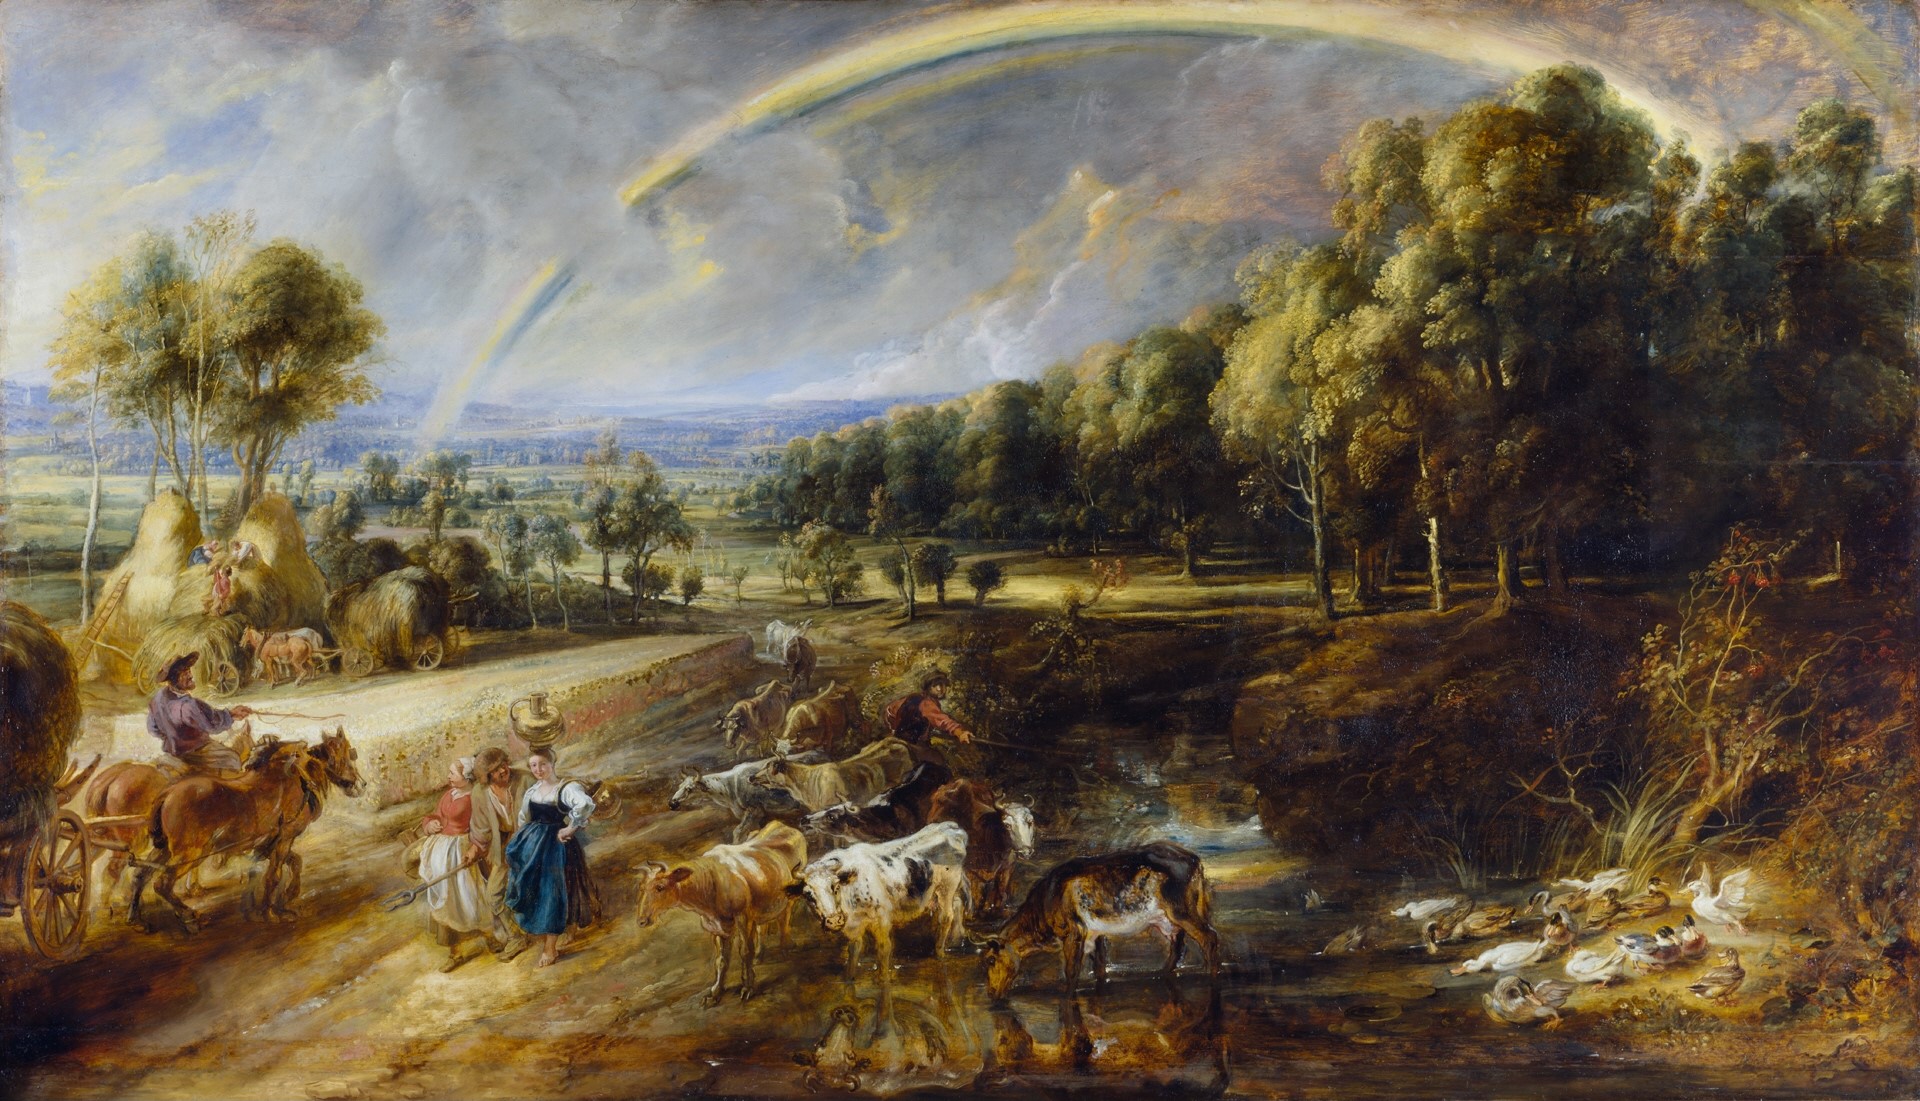 General 1920x1101 Peter Paul Rubens Oil on canvas oil painting painting landscape sky clouds trees animals people rainbows artwork cow horse hay